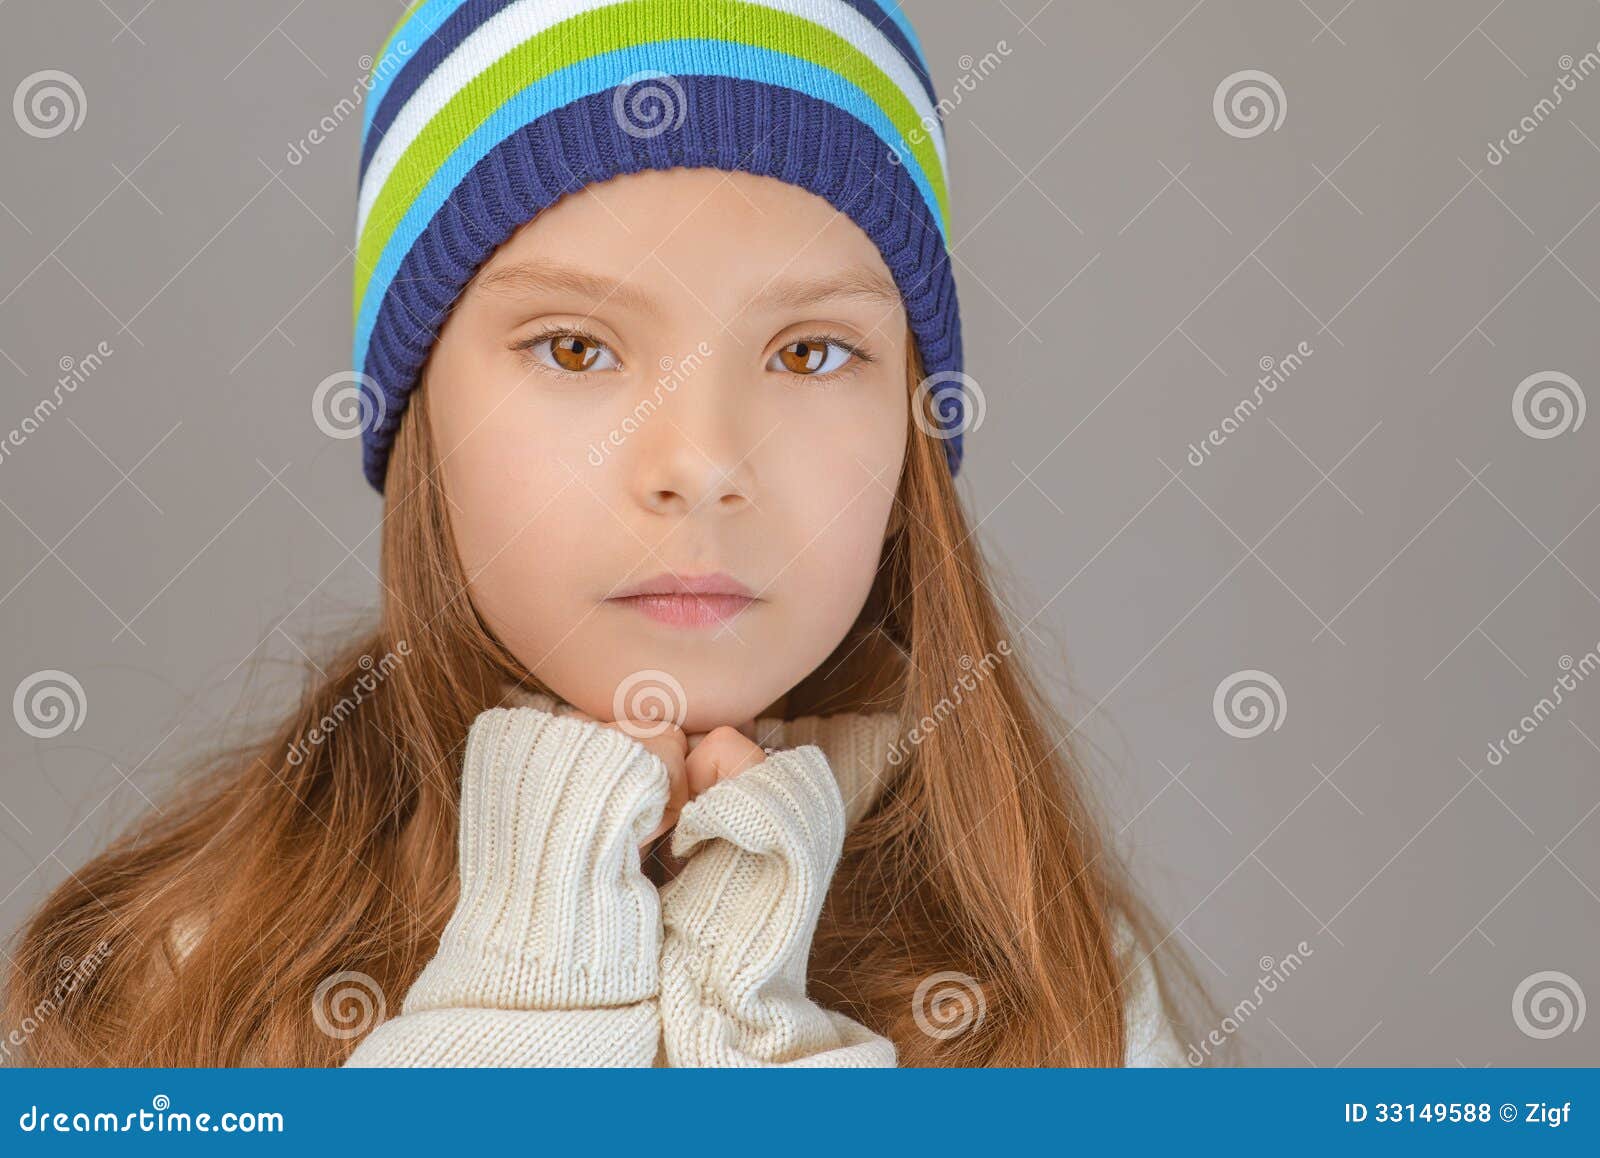 Sad Little Girl in Knitted Cap Stock Photo - Image of beauty, adorable ...